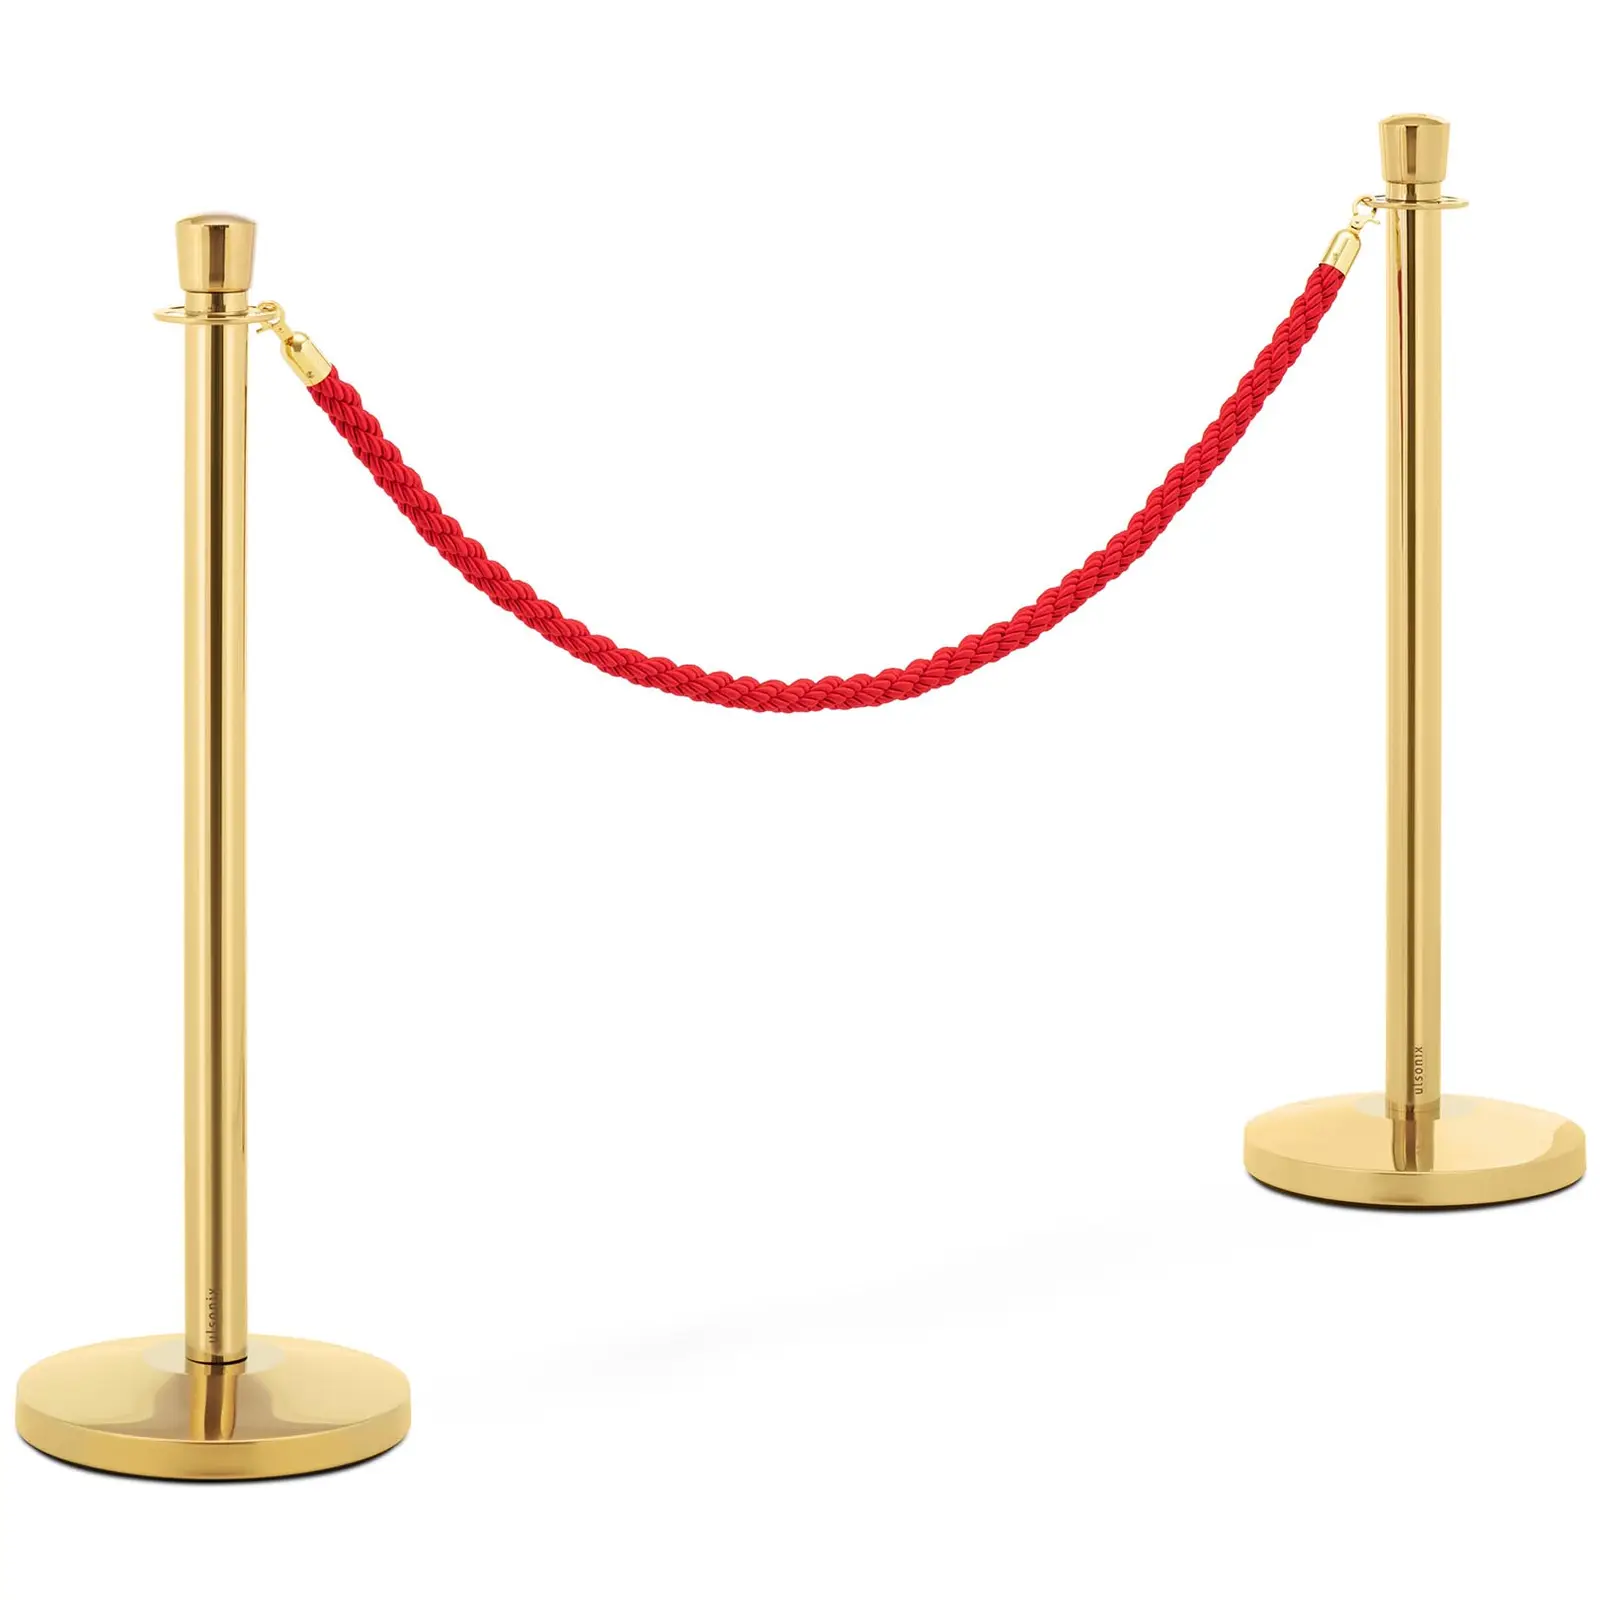 2 Barrier Posts - with barrier rope - 150 cm - colour - gold